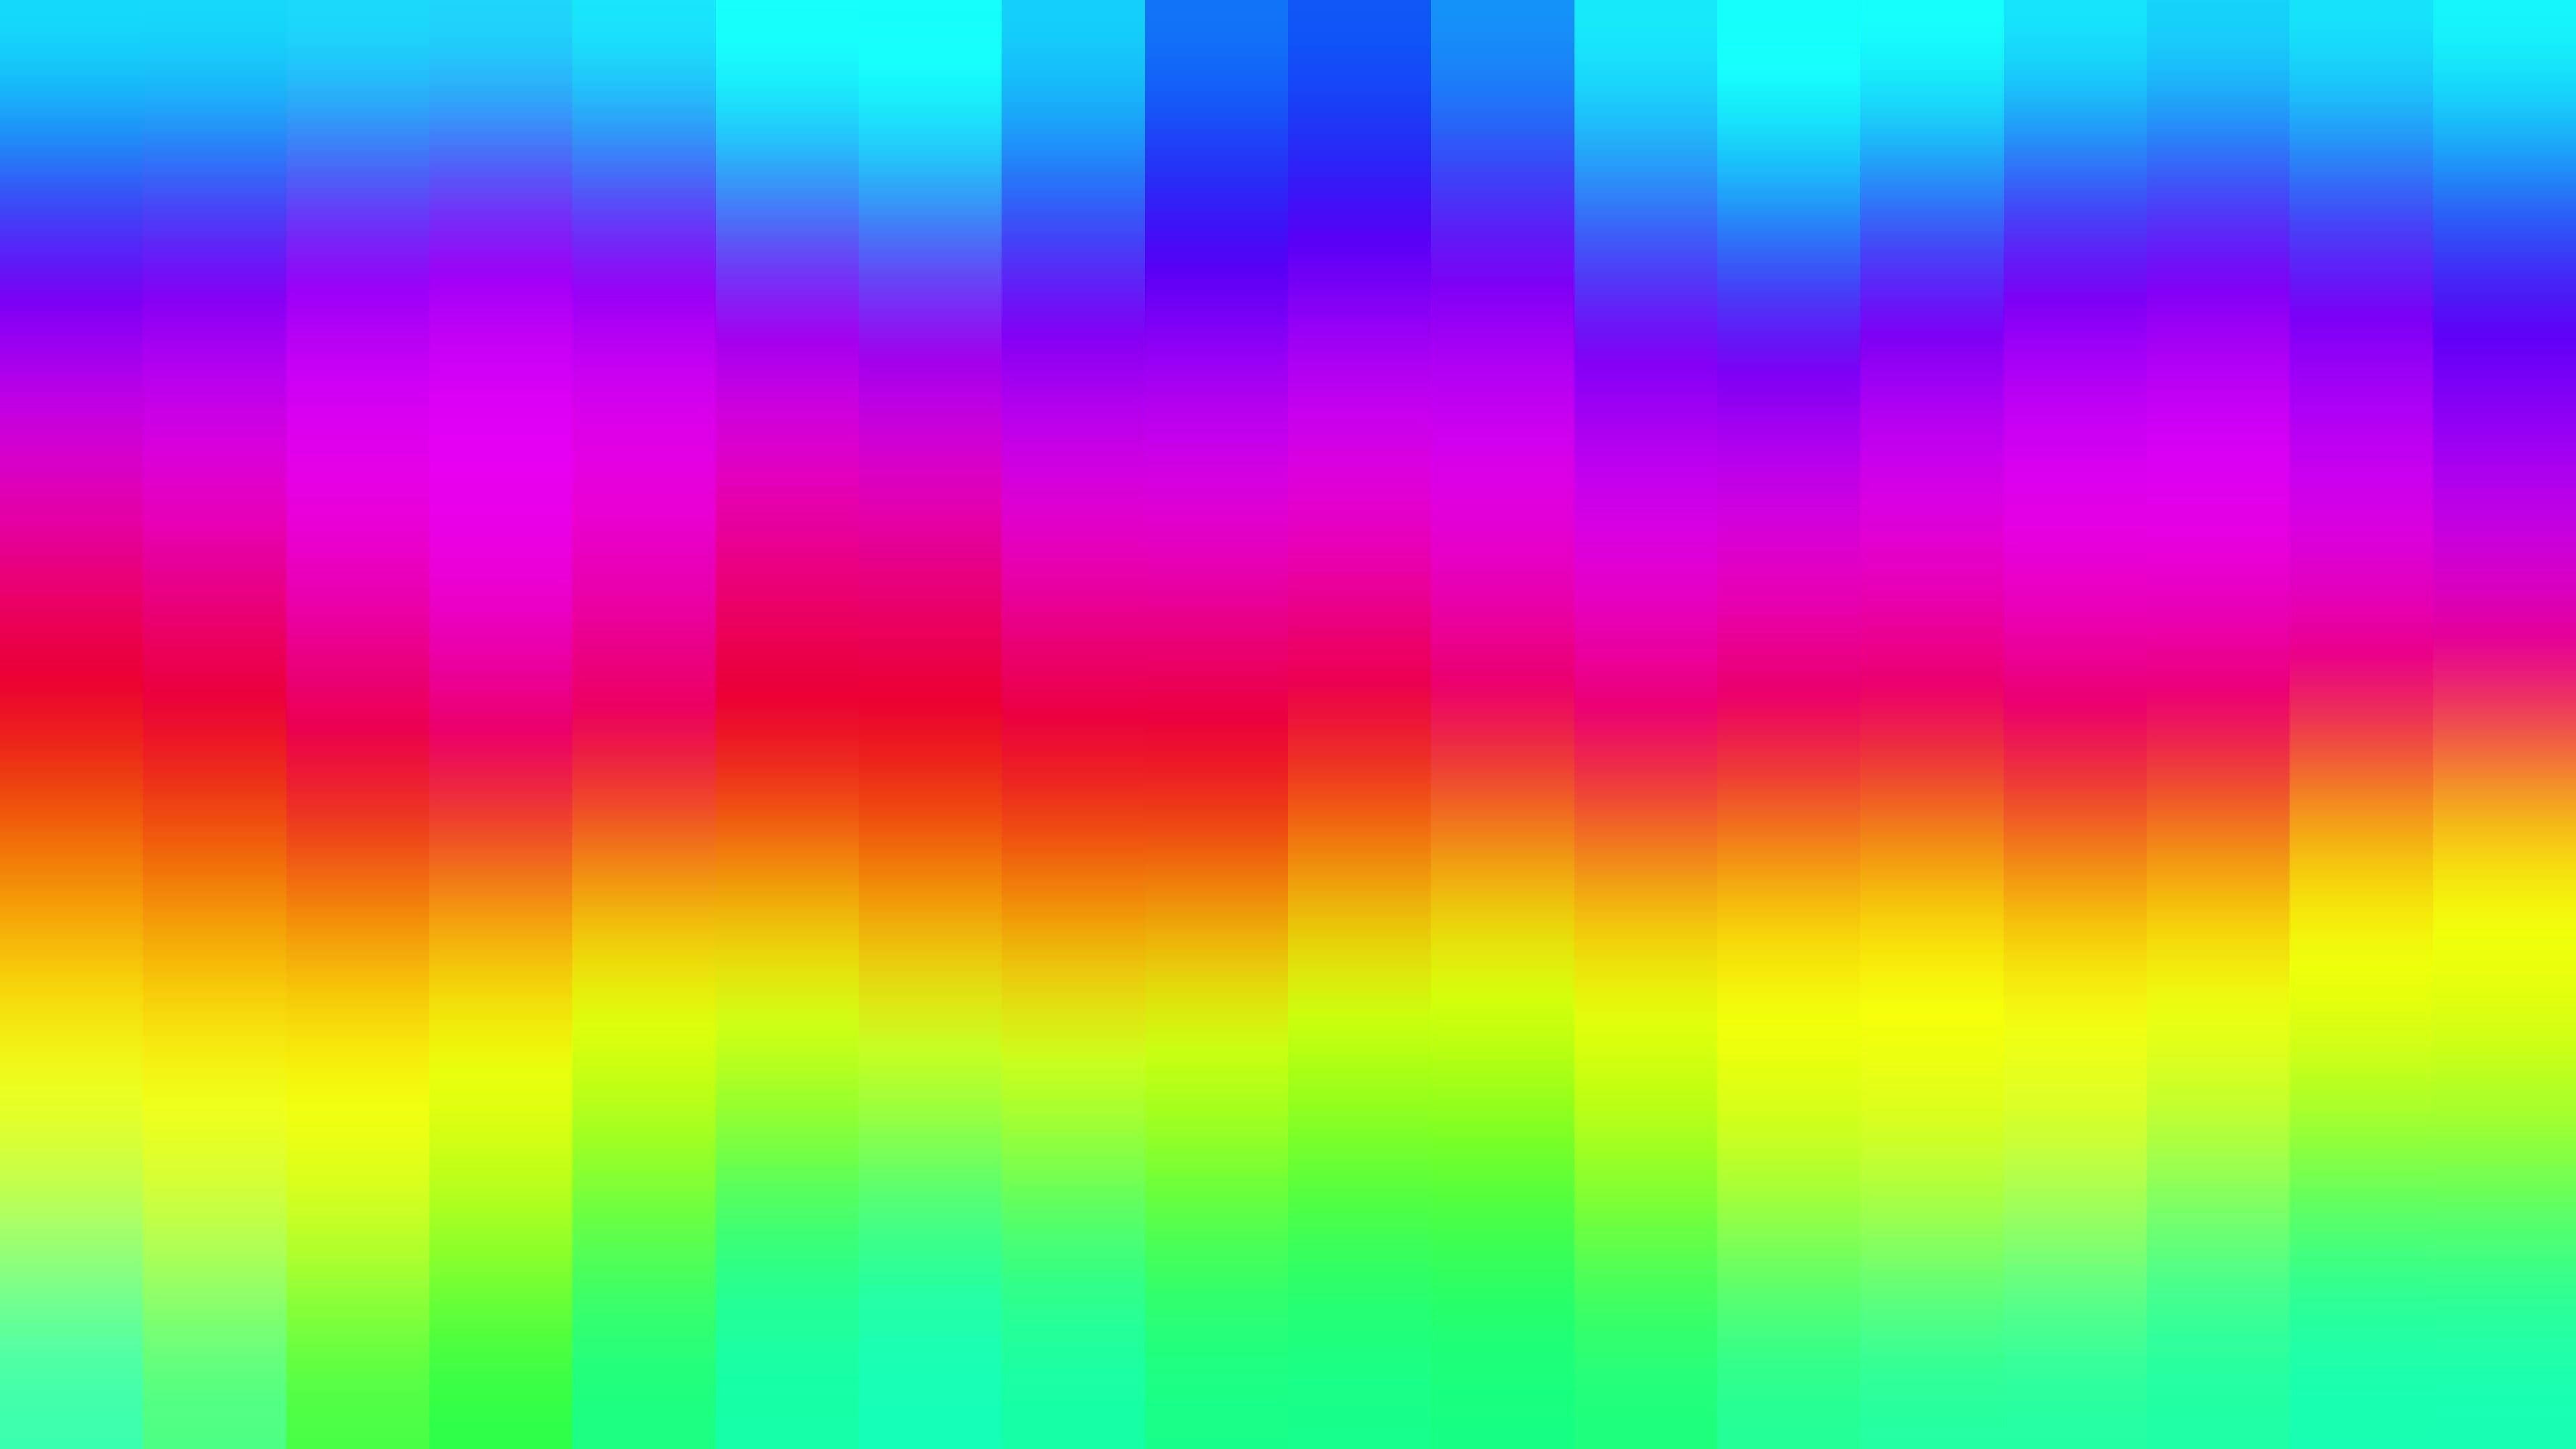 https://static.vecteezy.com/system/resources/thumbnails/025/416/033/original/smooth-vertical-beam-colorful-gradient-rainbow-color-animation-background-2d-computer-rendering-pattern-video.jpg